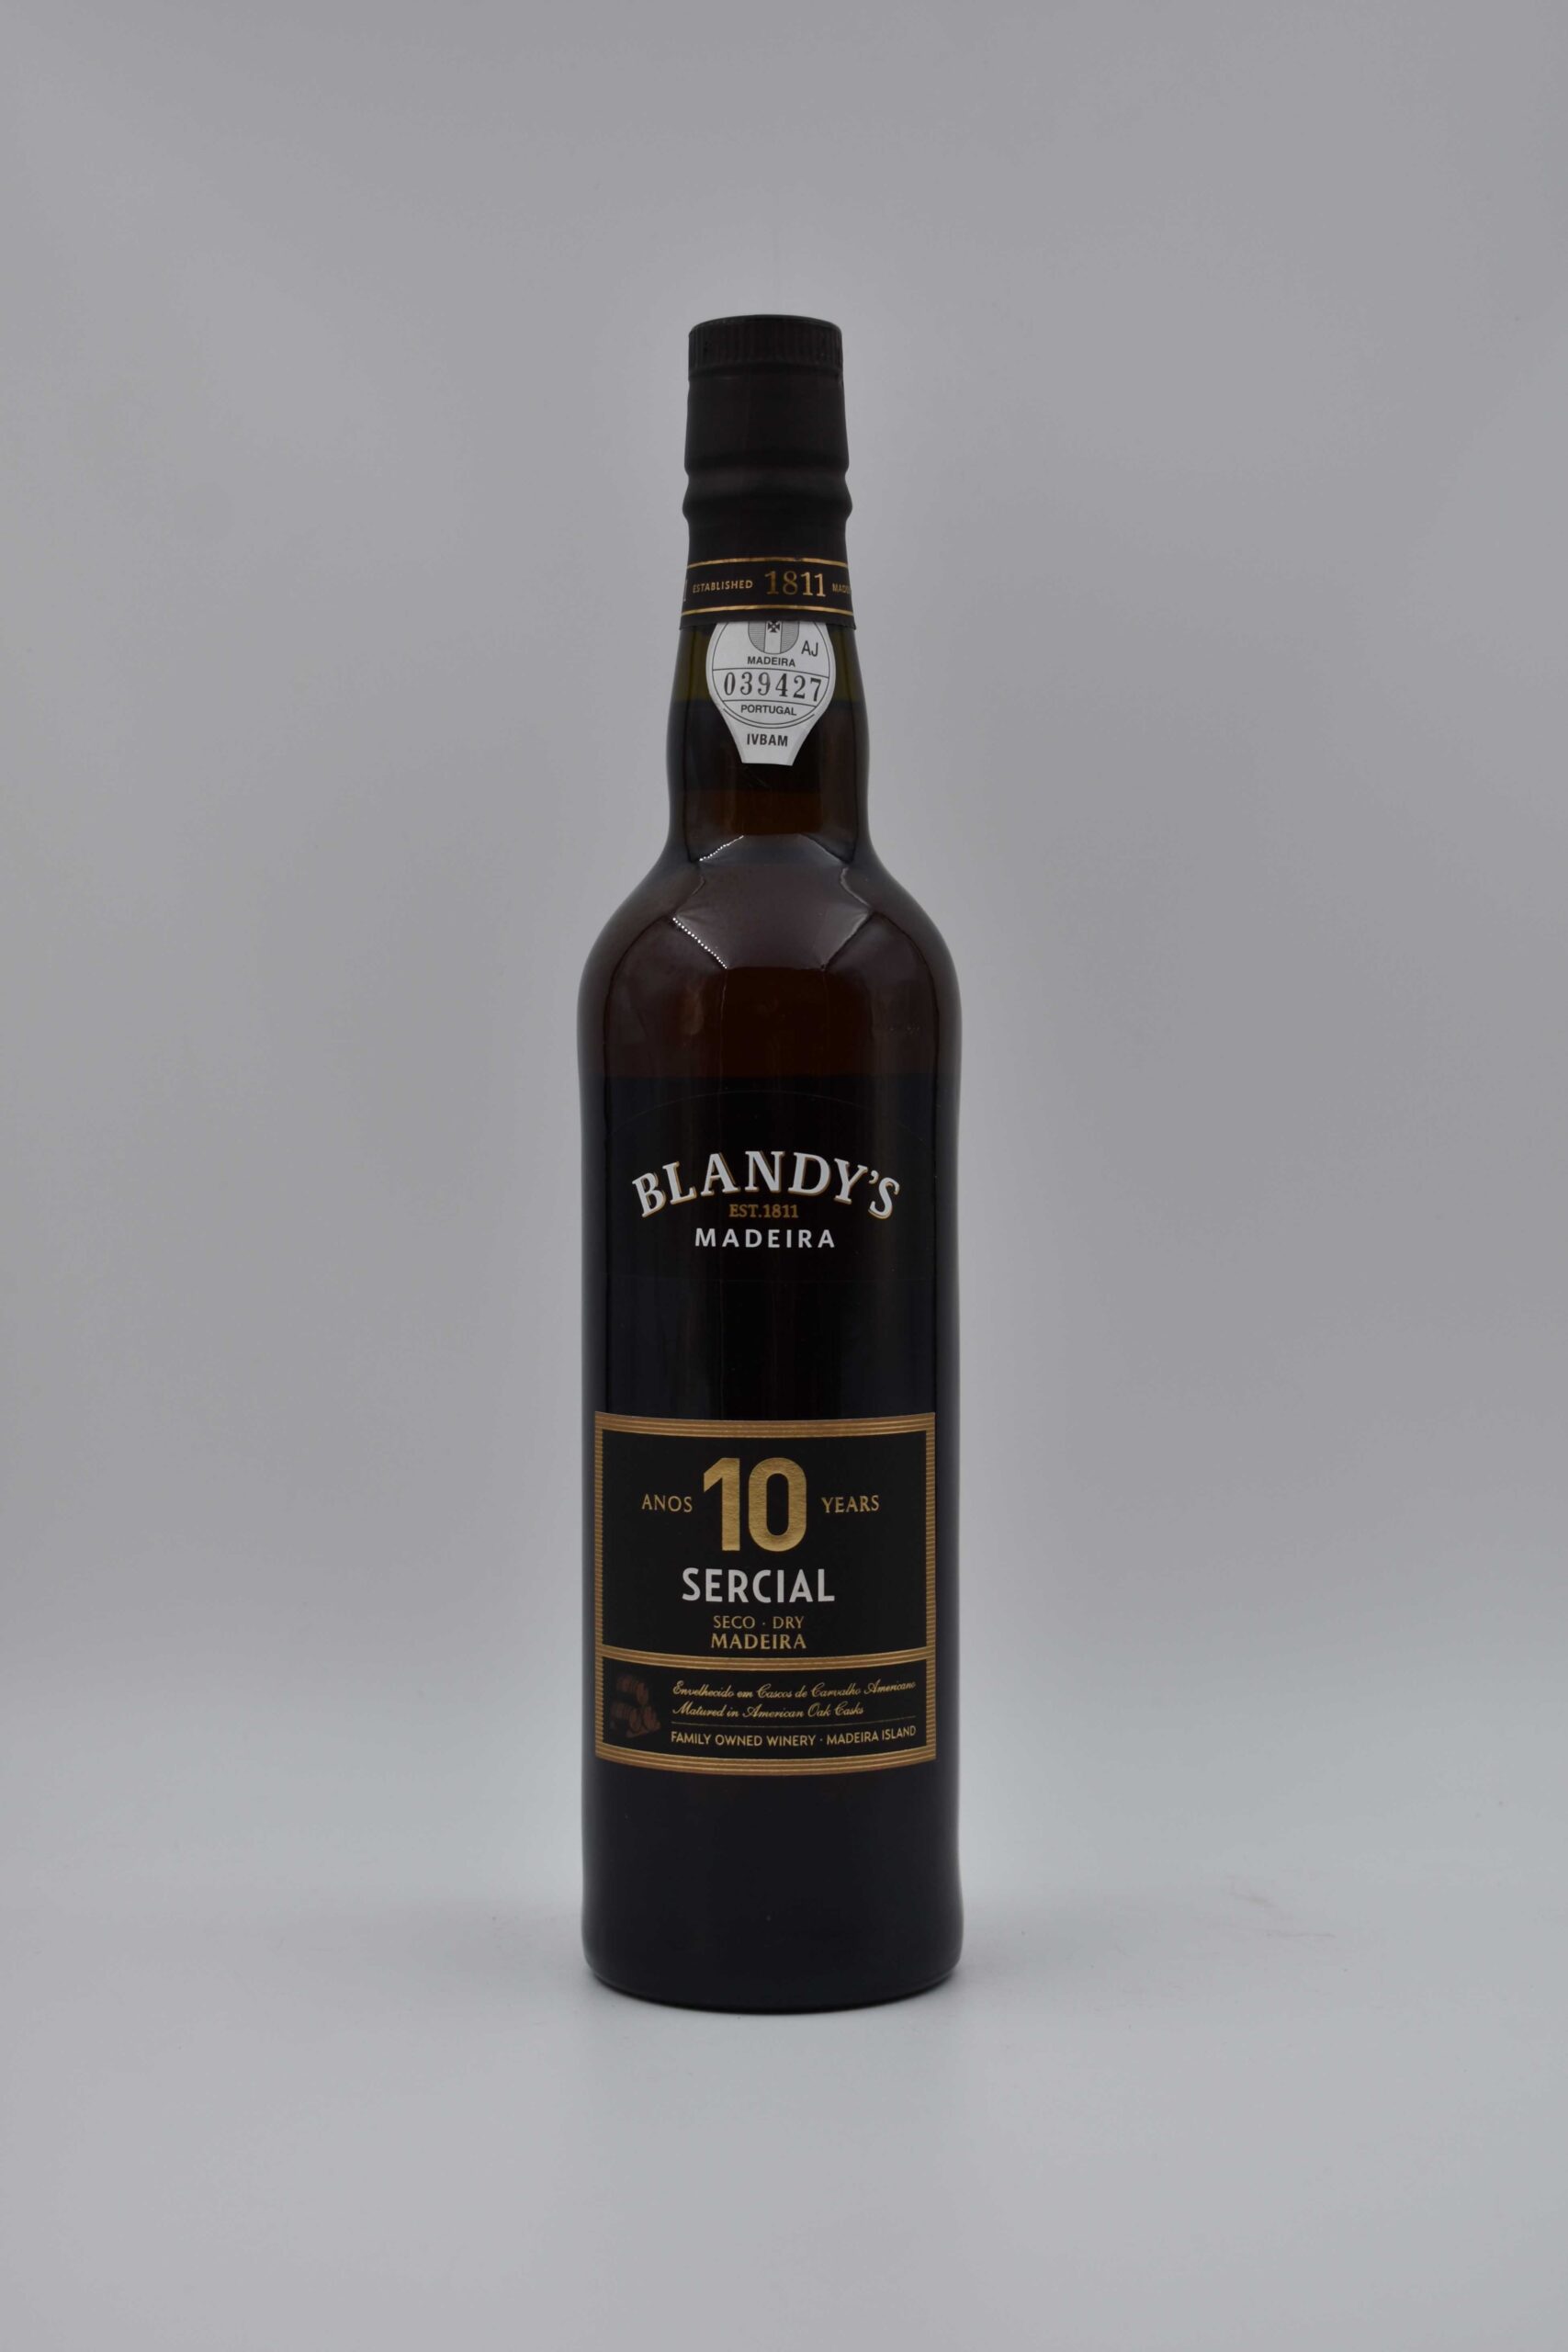 BLANDY S MADEIRA SERCIAL 10 YEARS OLD 500ml 103-191